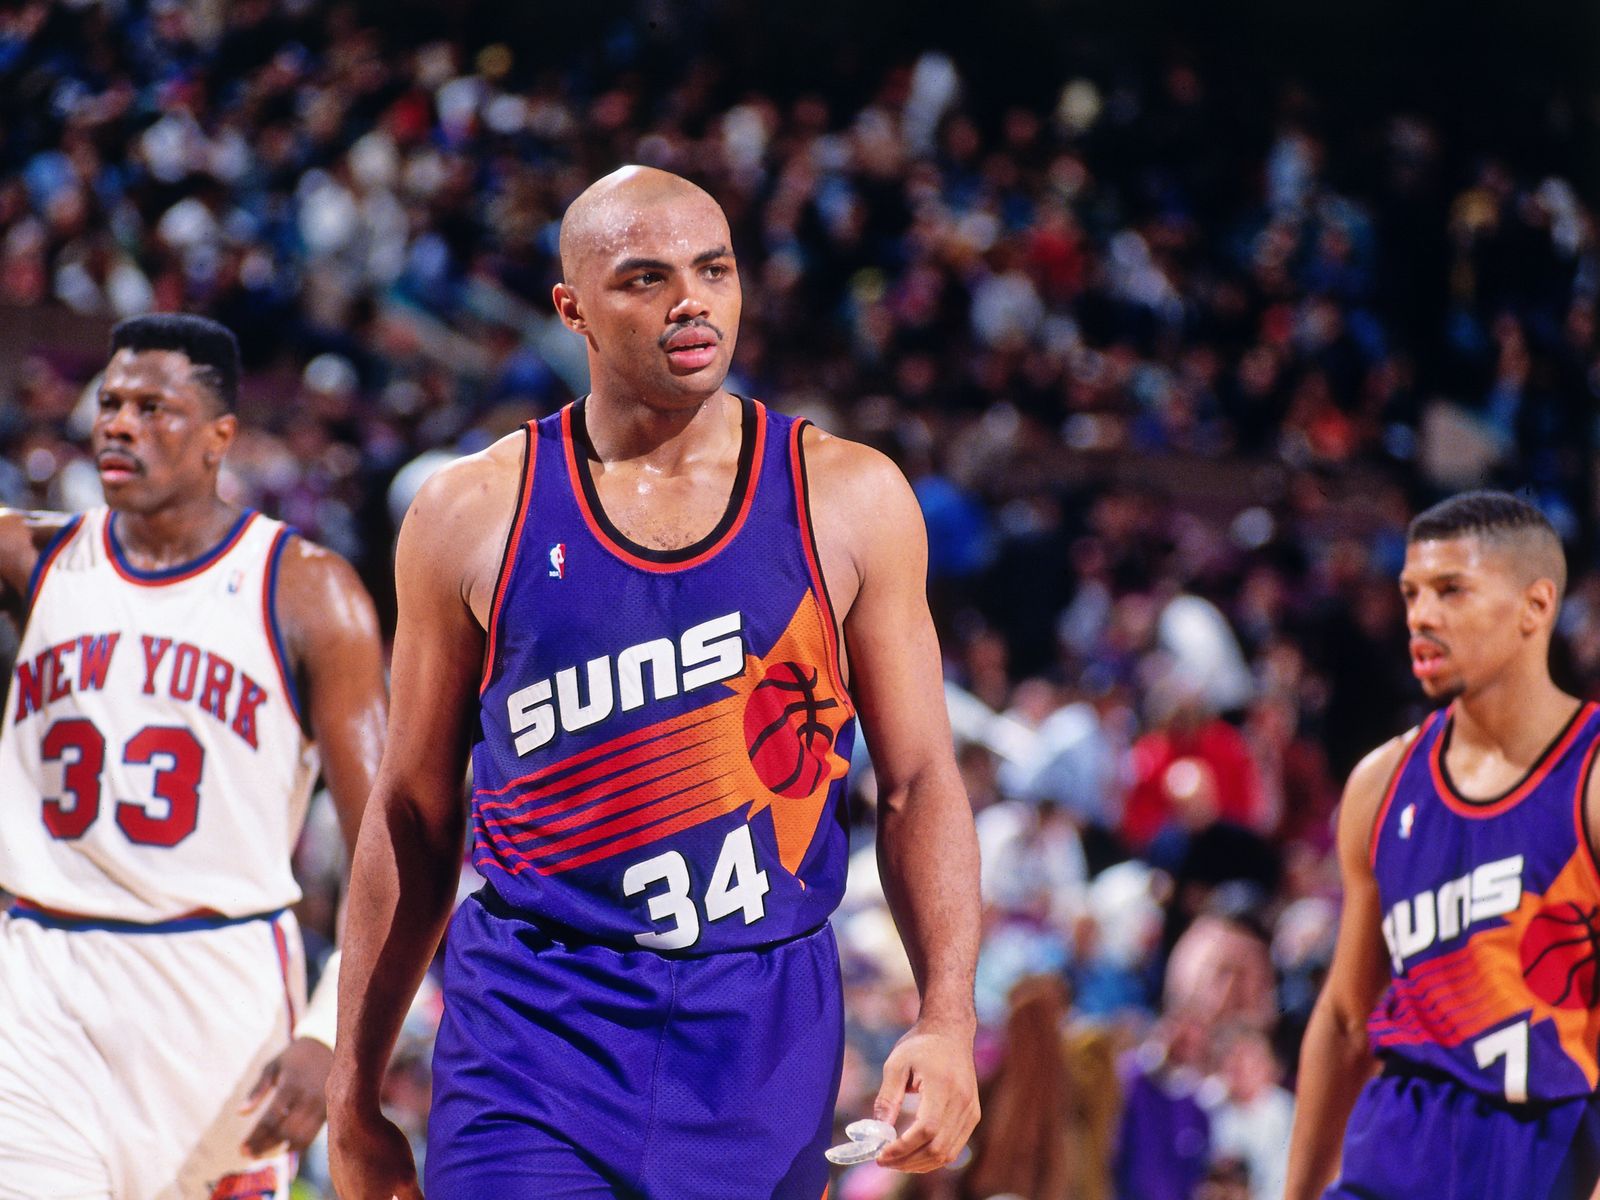 What's old is new: Suns to bring back iconic look from 92-93 season